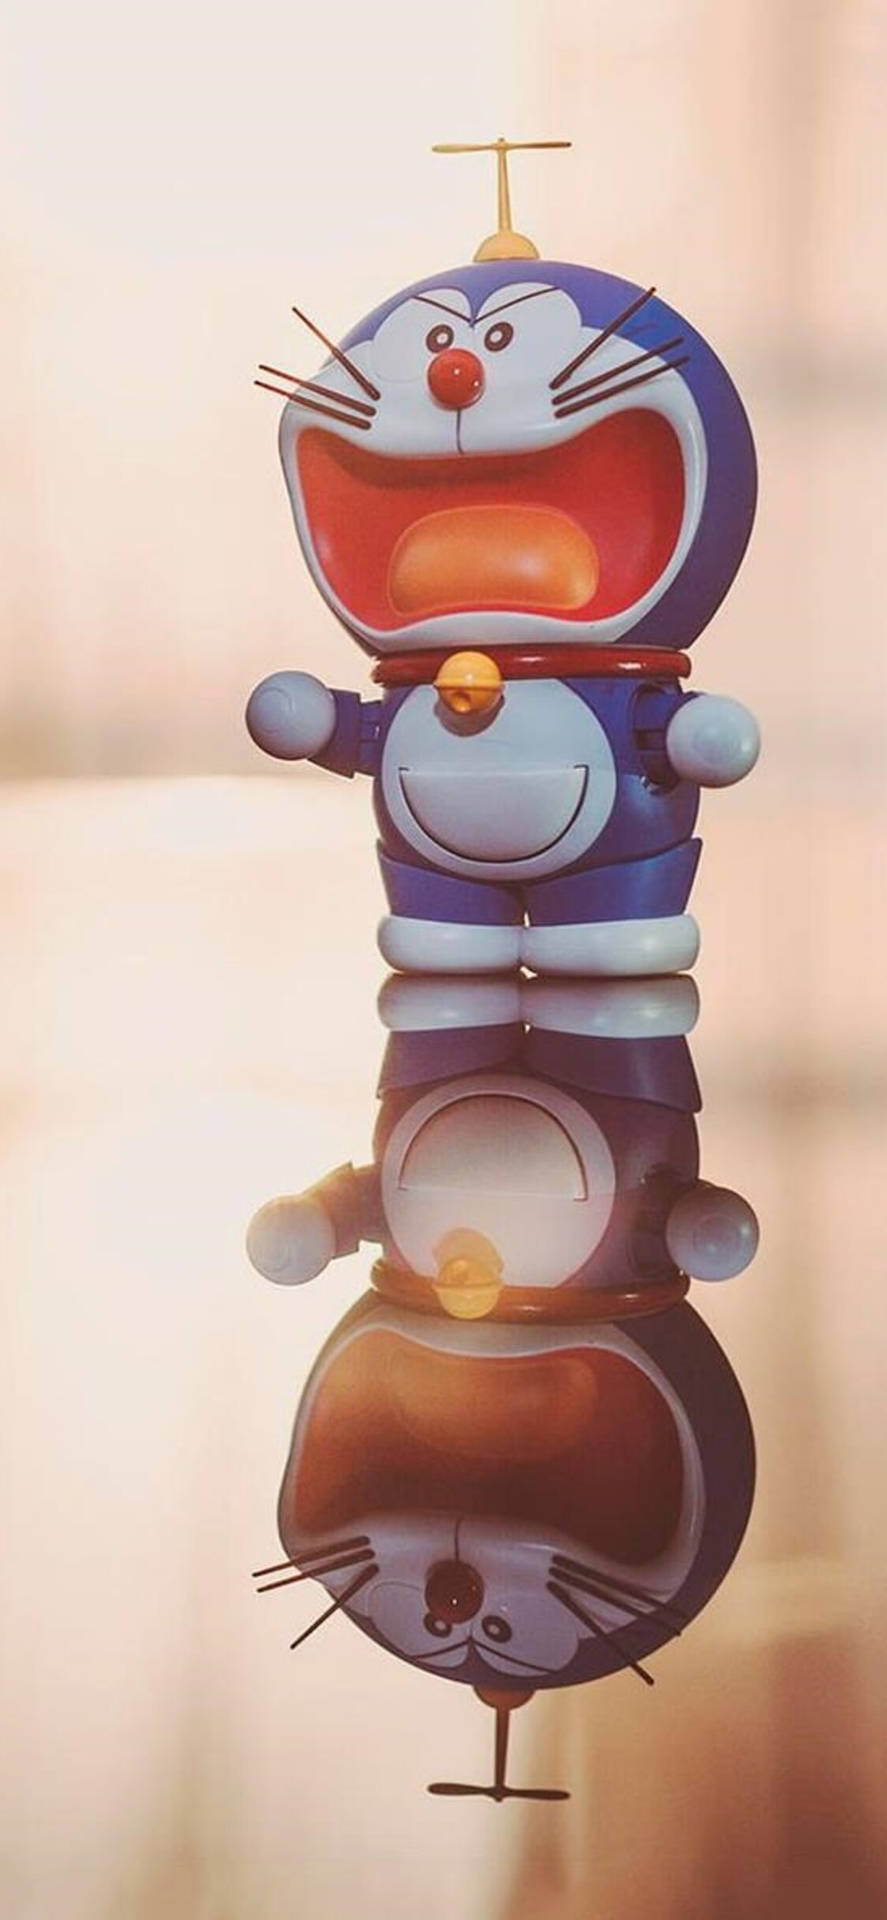 Angry Mechanical Toy Doraemon Iphone Background